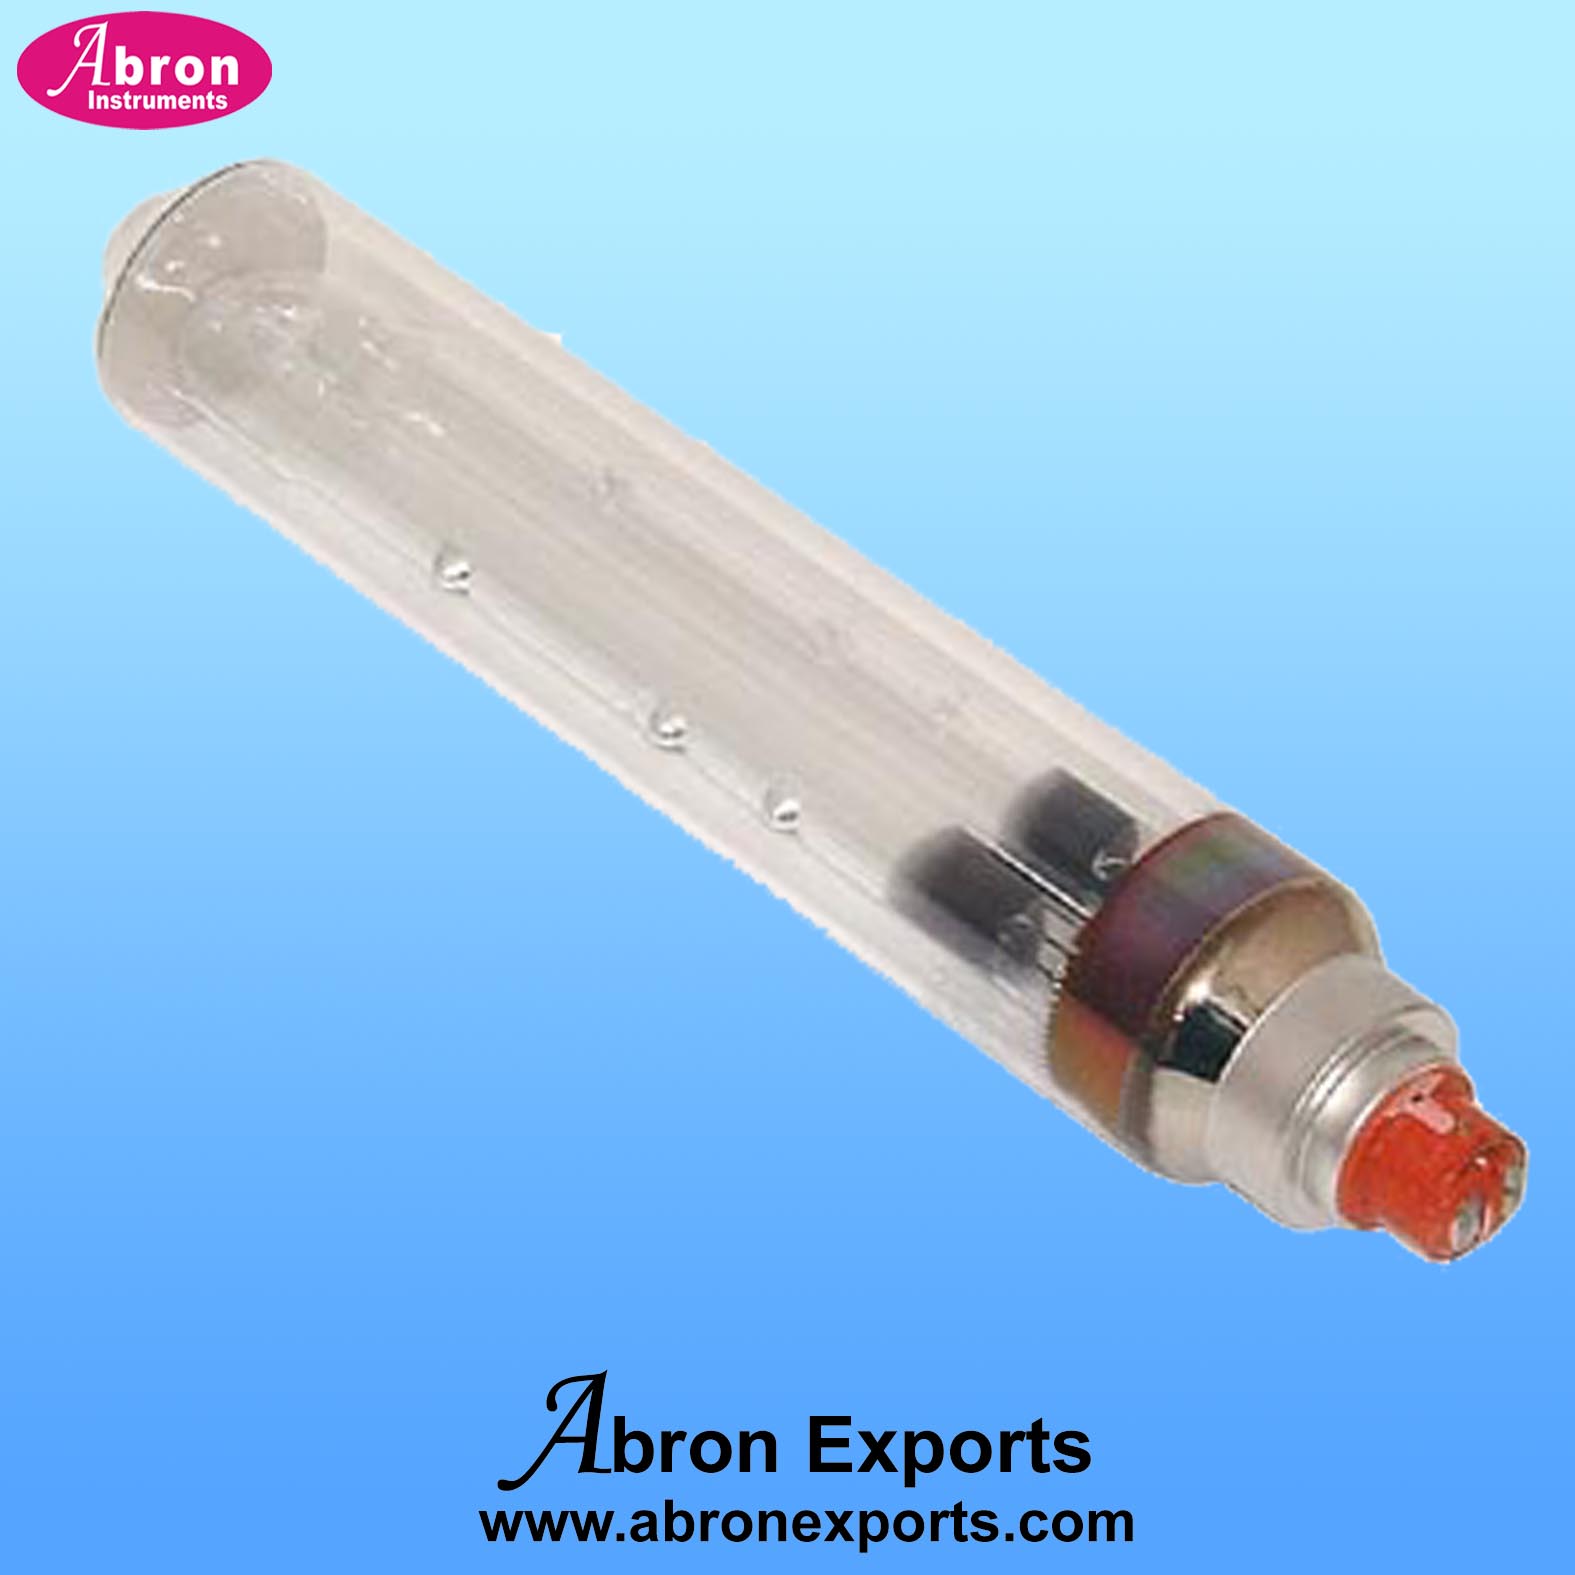 S V Lamp Sodium Vapour lamp lab use 	35W Low pressure with jacket for pure light  abron AP-910A or AE-1391A